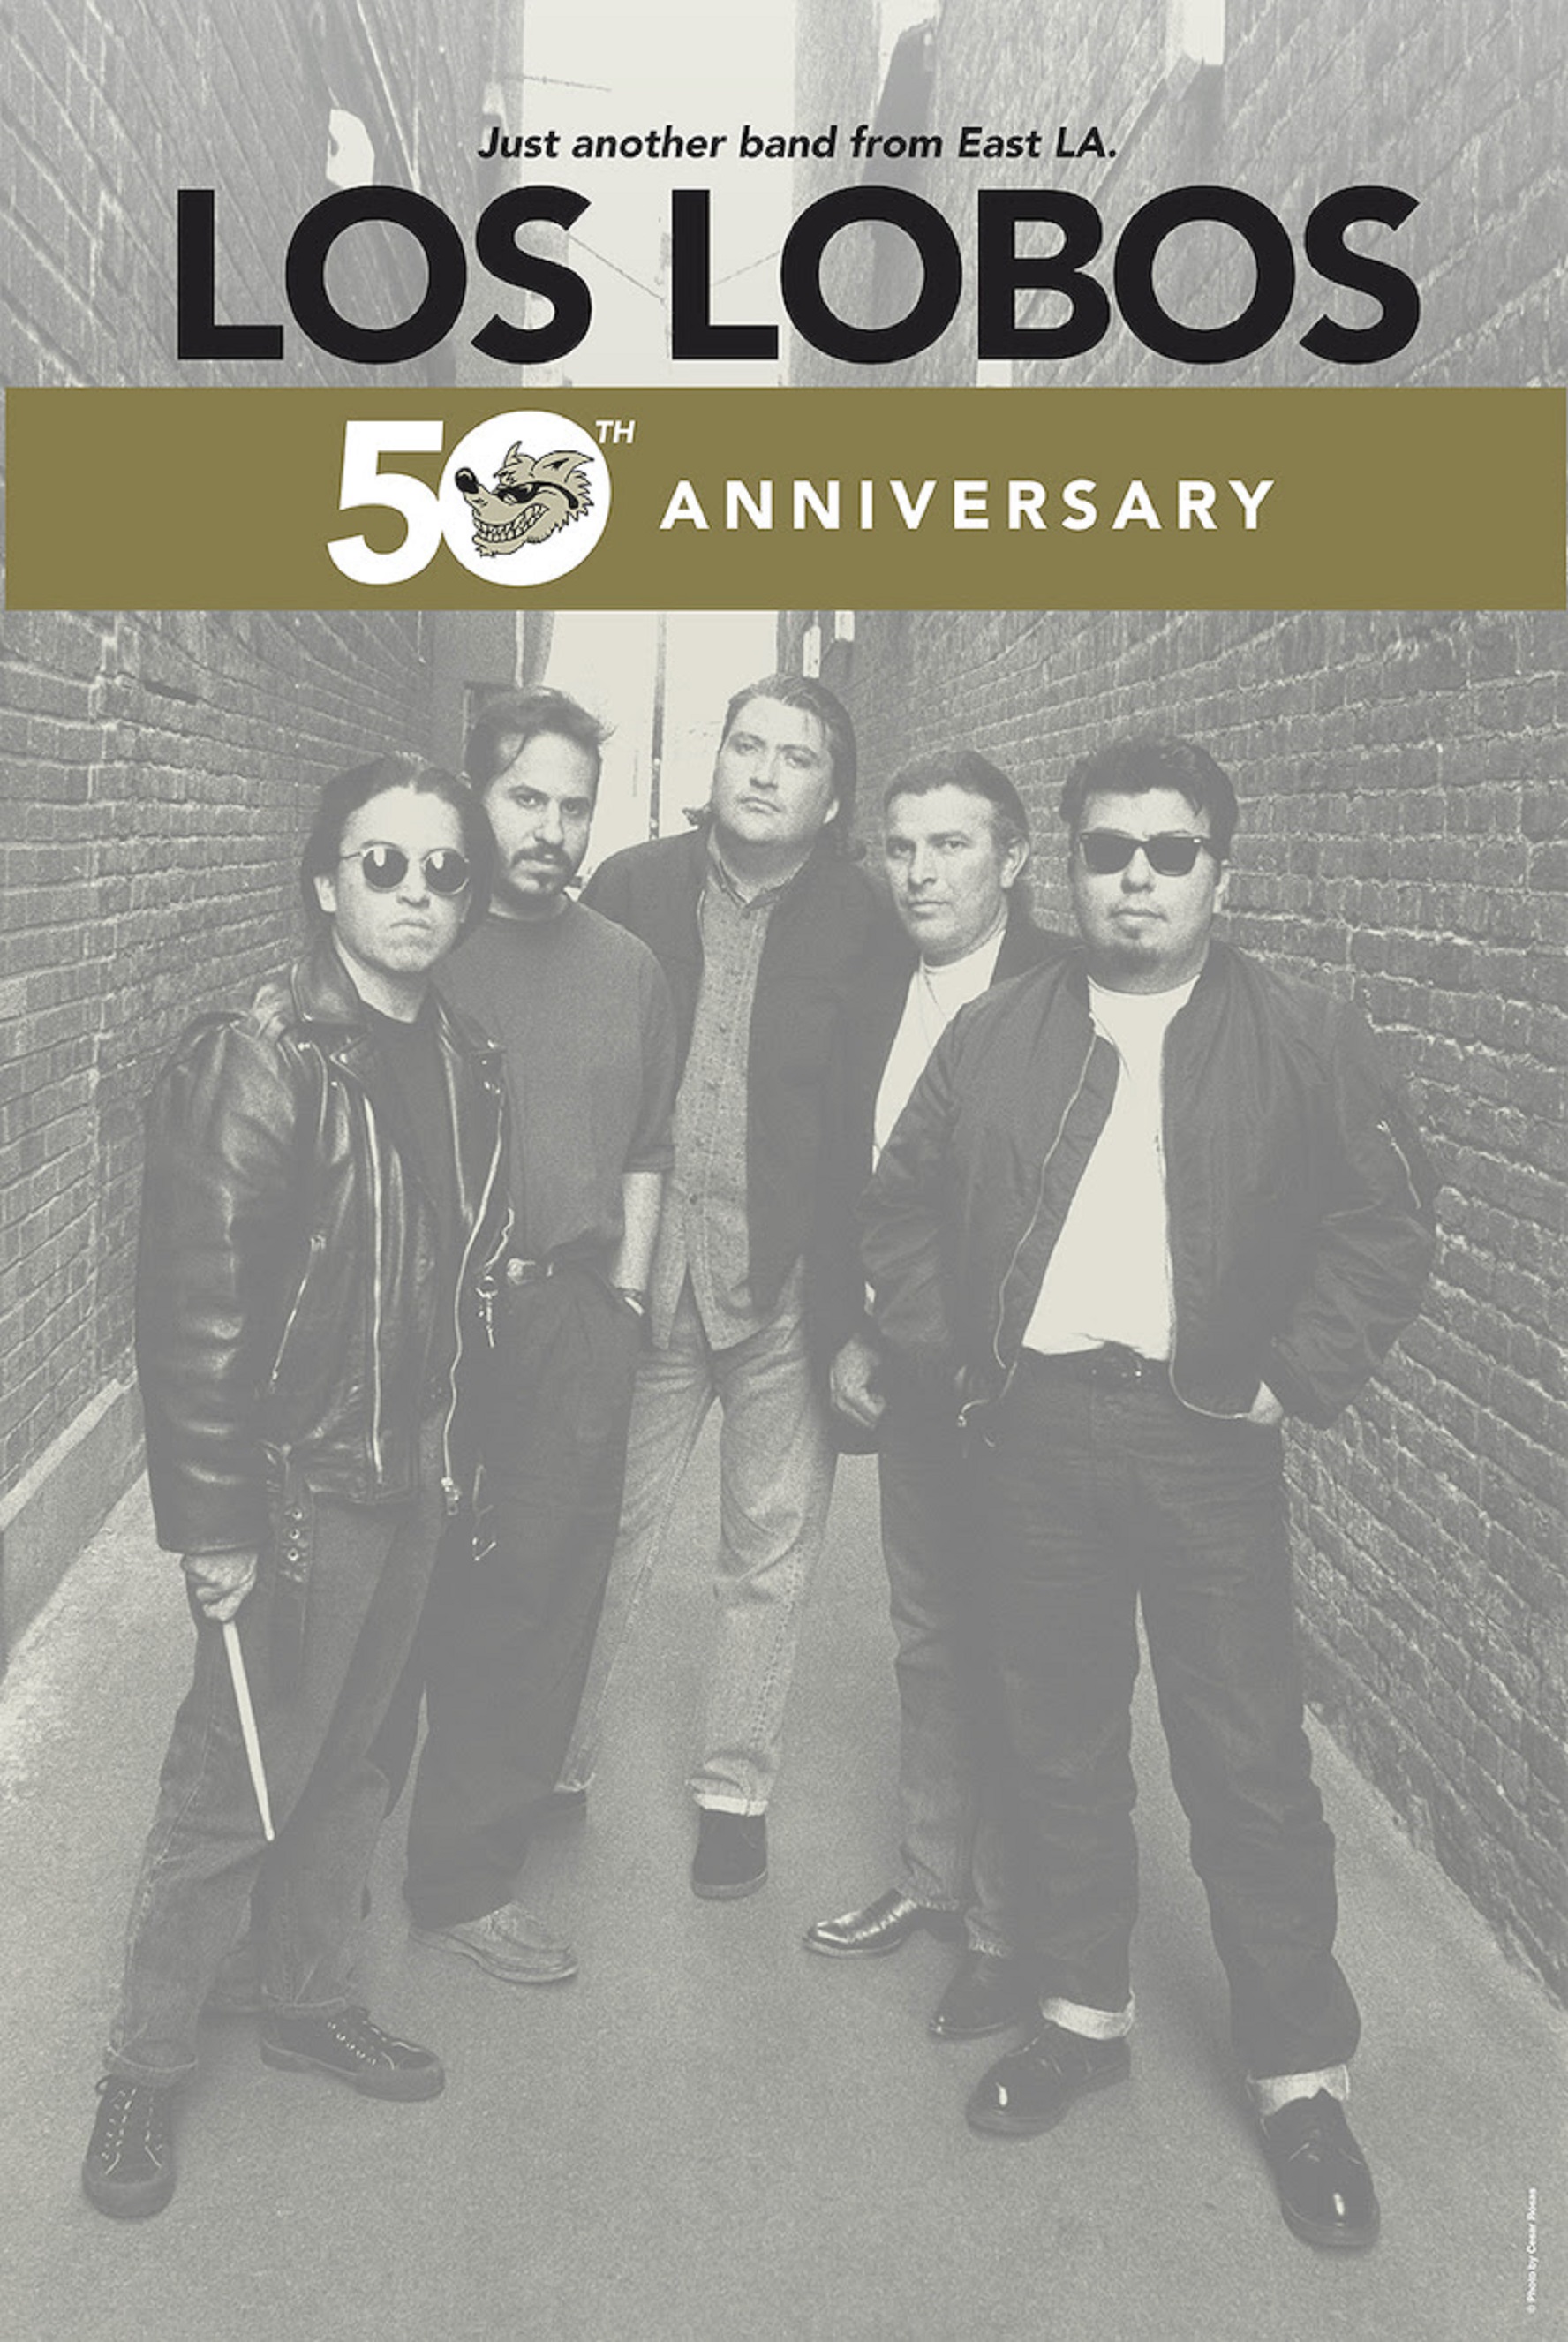 Los Lobos Announce 50th Anniversary Concerts - Grammy Award Winning "Native Sons" Out Now